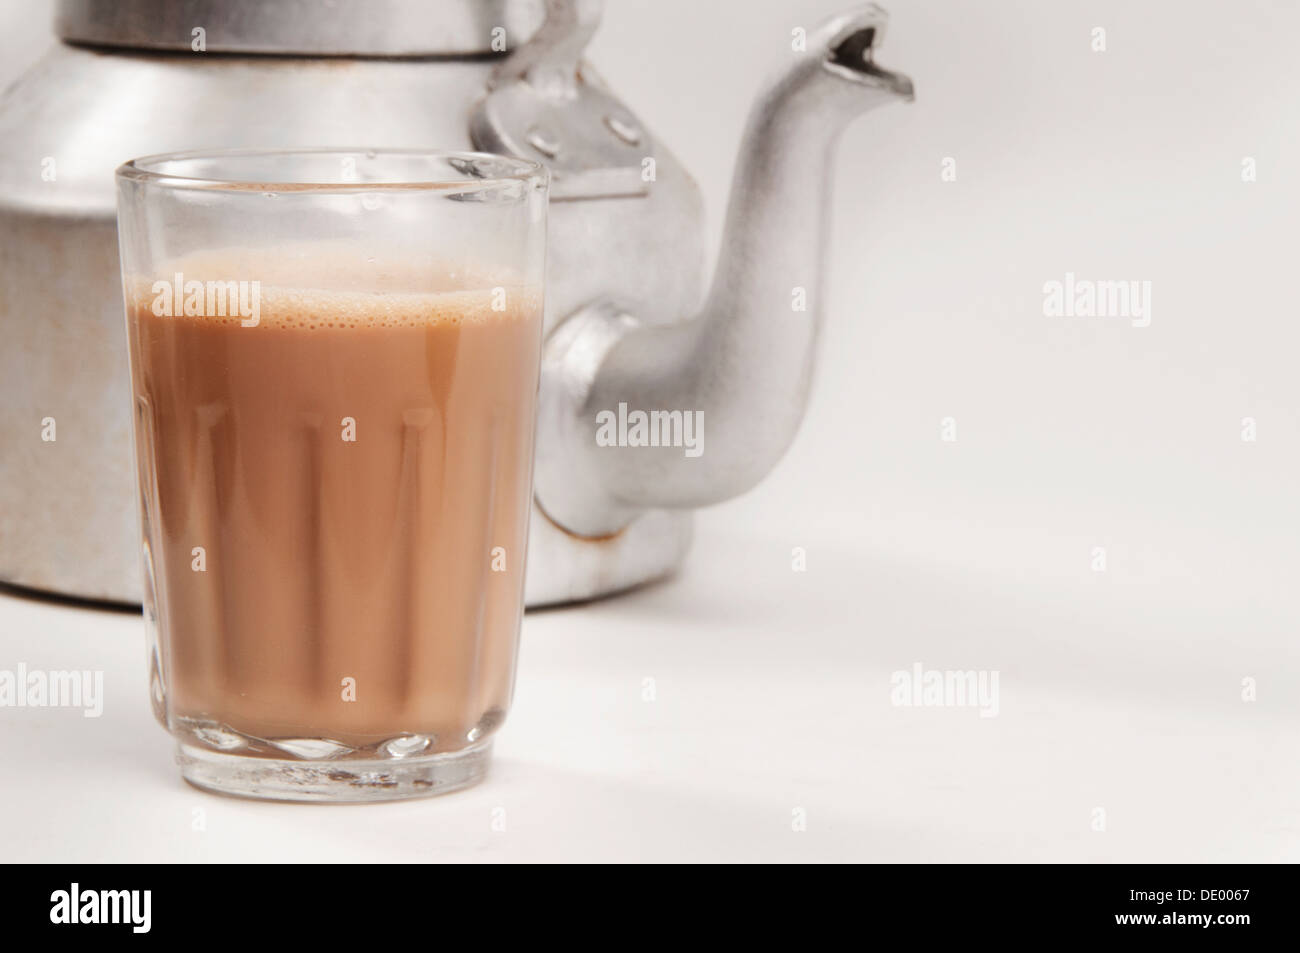 https://c8.alamy.com/comp/DE0067/glass-of-chai-with-an-old-fashioned-kettle-isolated-over-white-background-DE0067.jpg